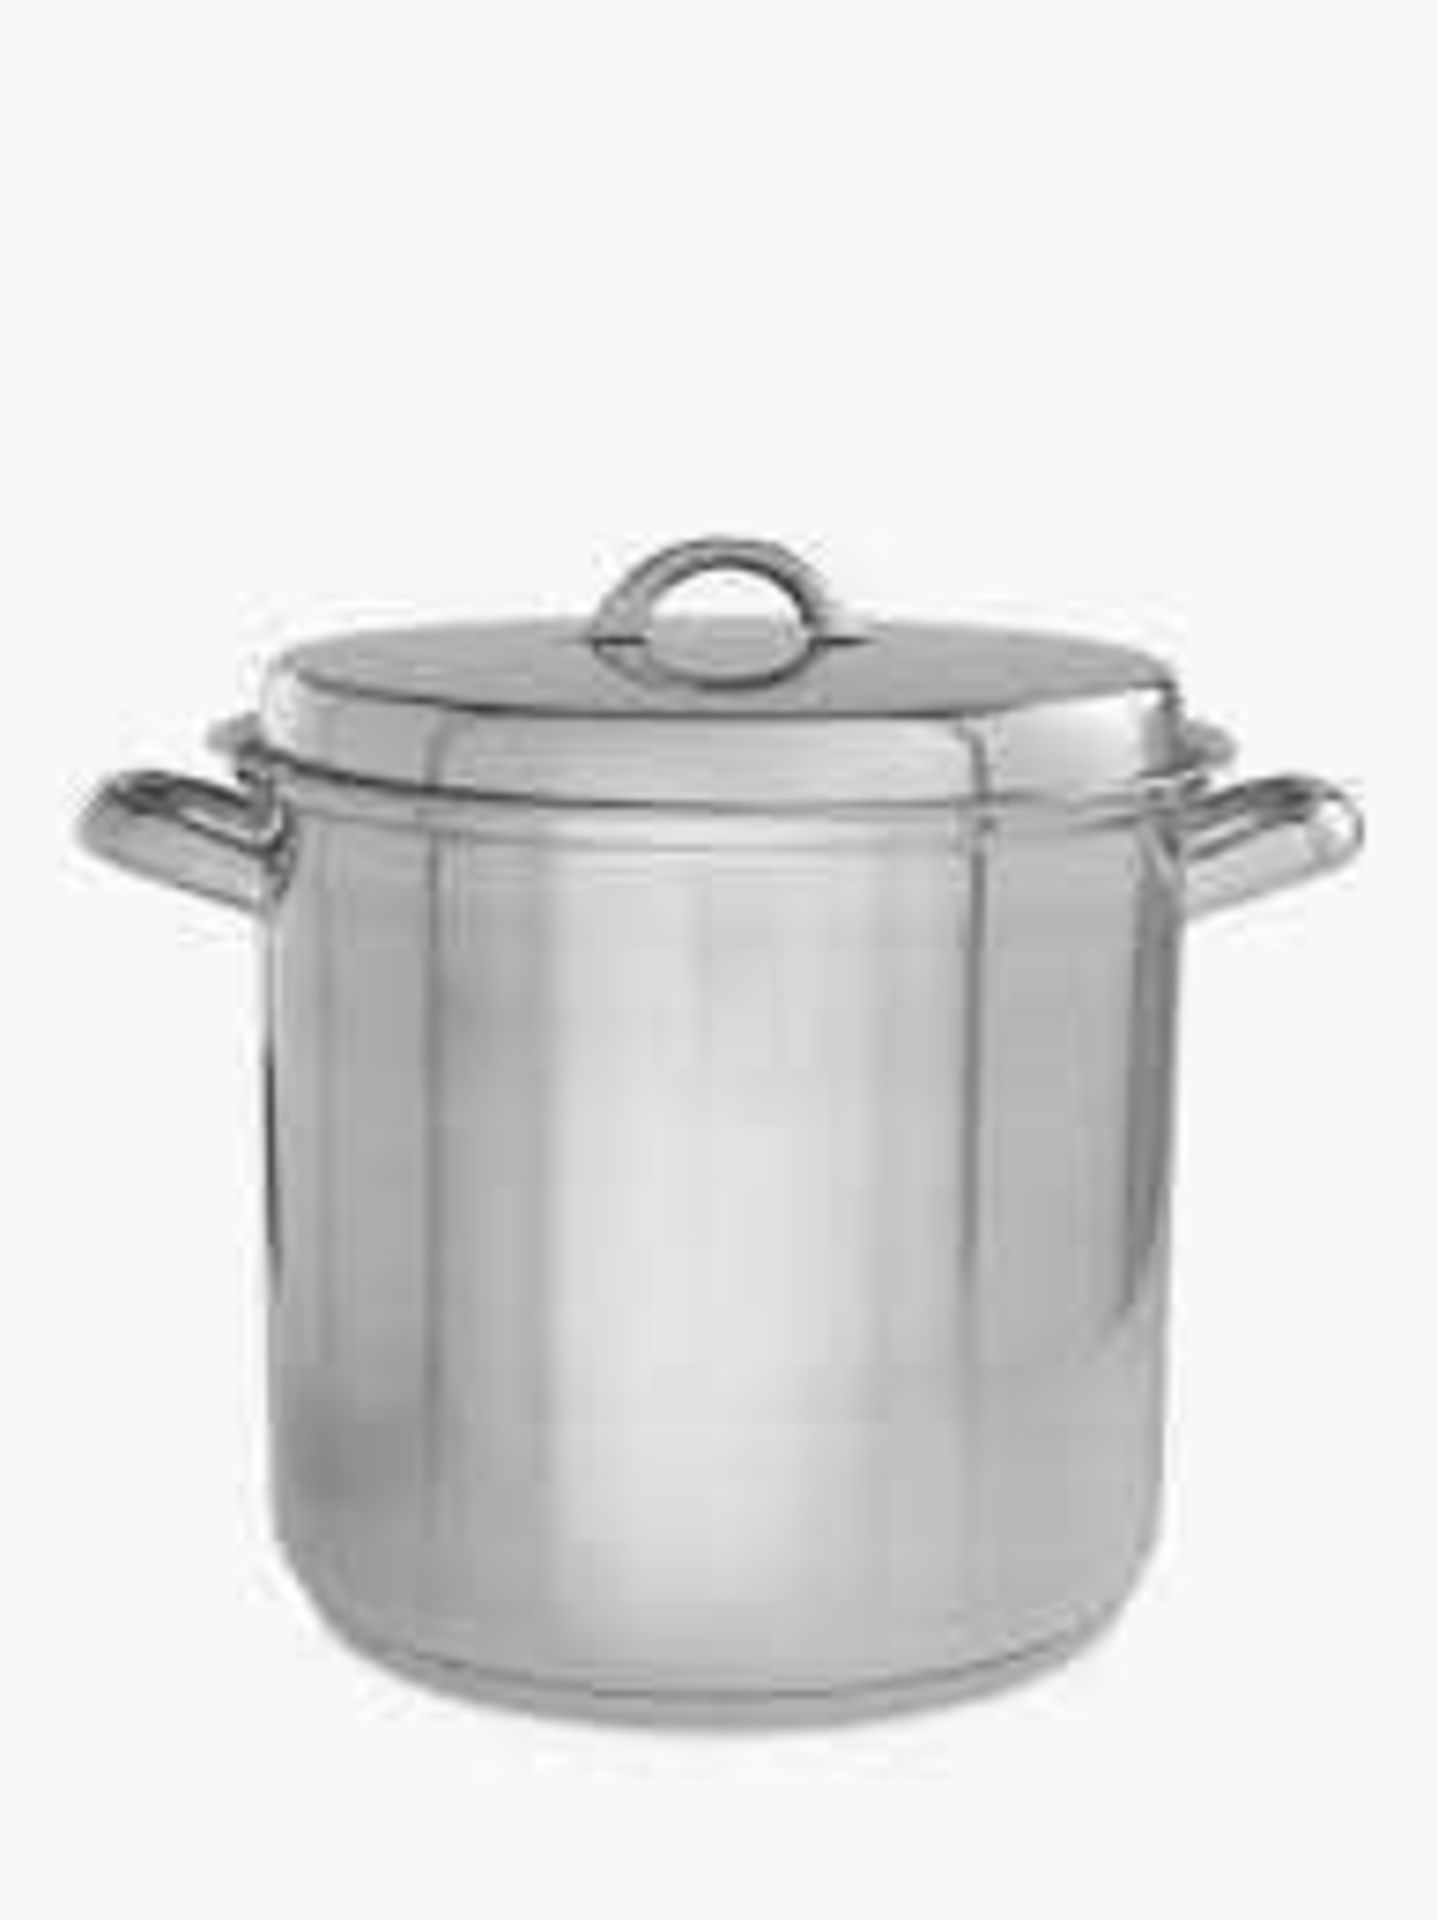 Combined RRP £200 Lot To Contain Boxed John Lewis Classic 11 Litre Stockpot With Lid, Unboxed House